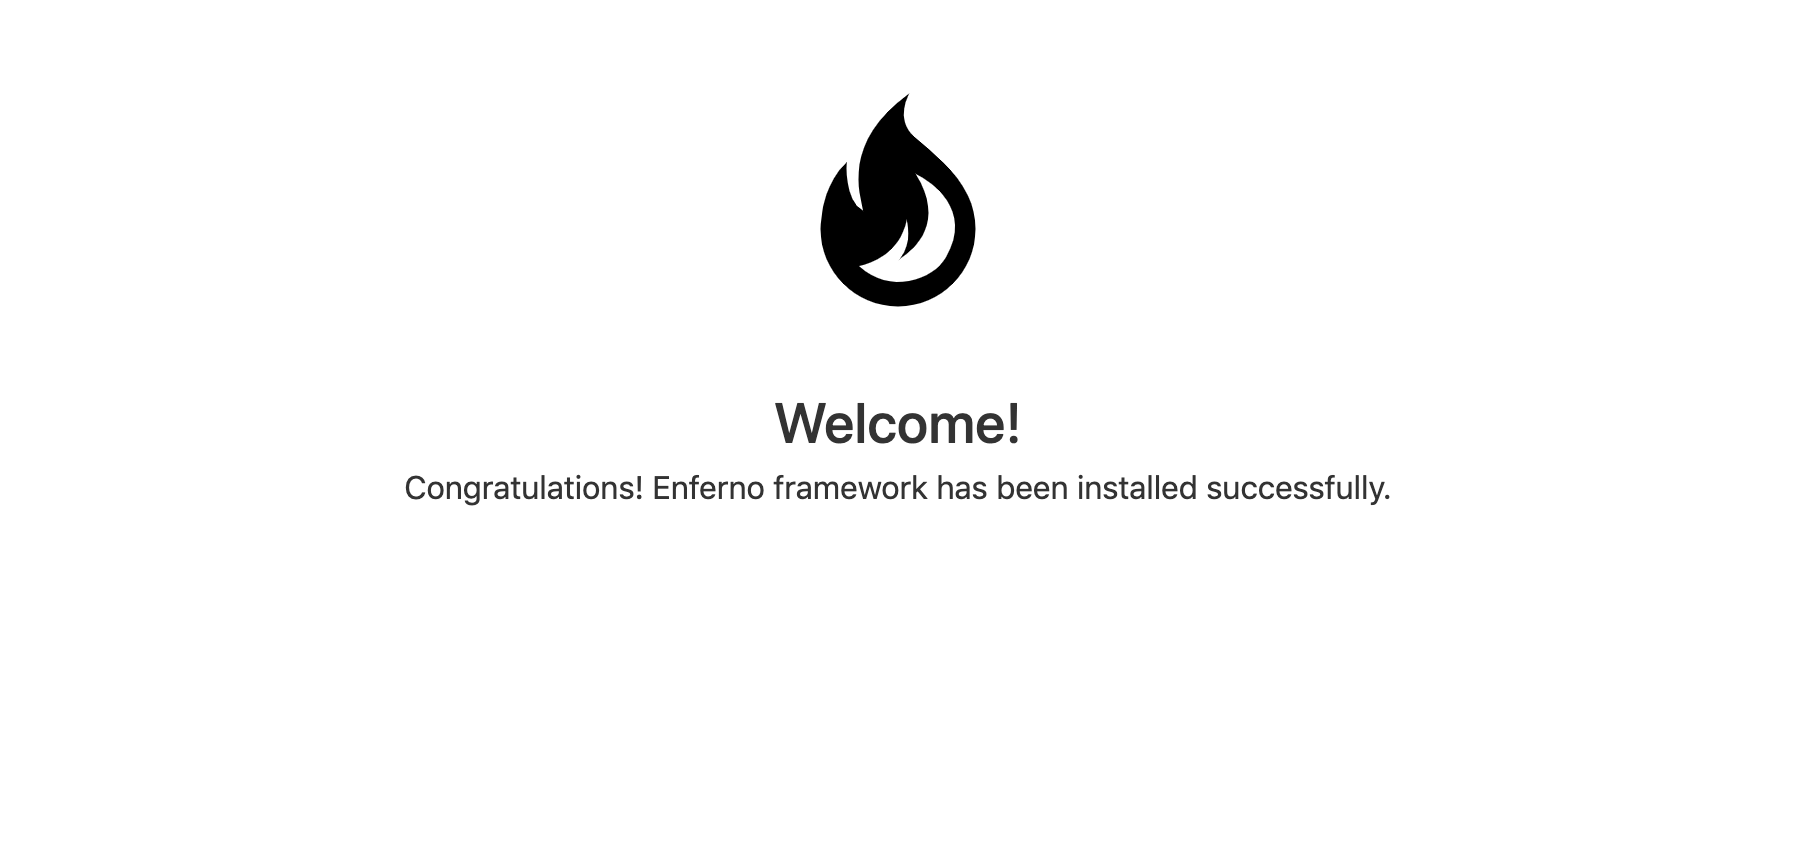 Getting started with Enferno framework